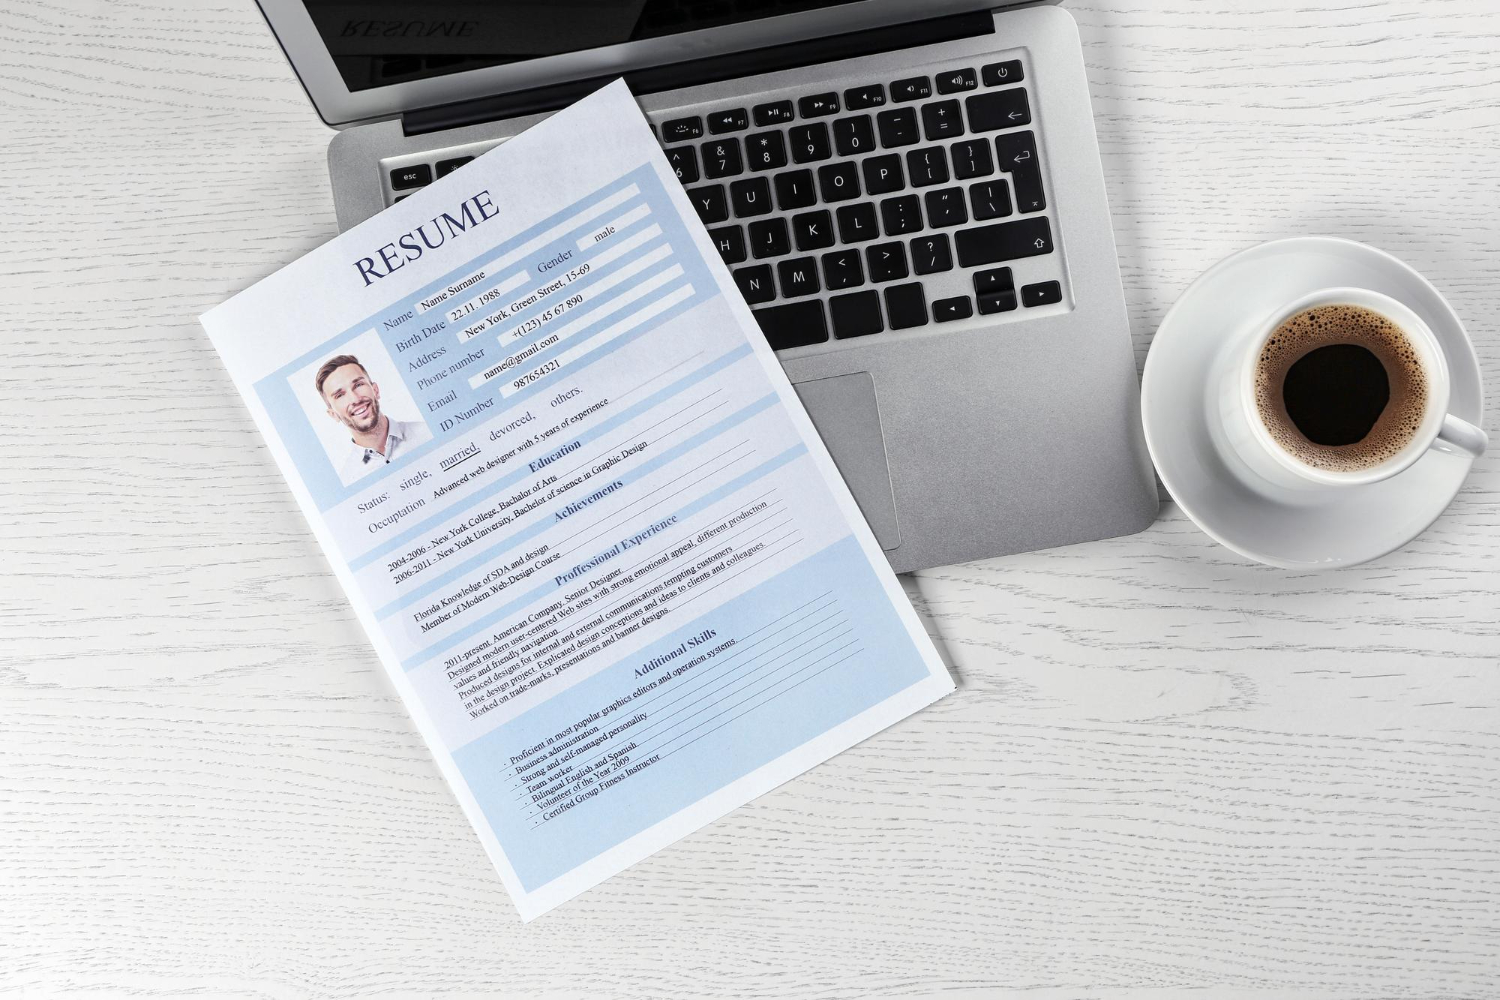 A printed resume, cup of coffee, and a laptop on a desk